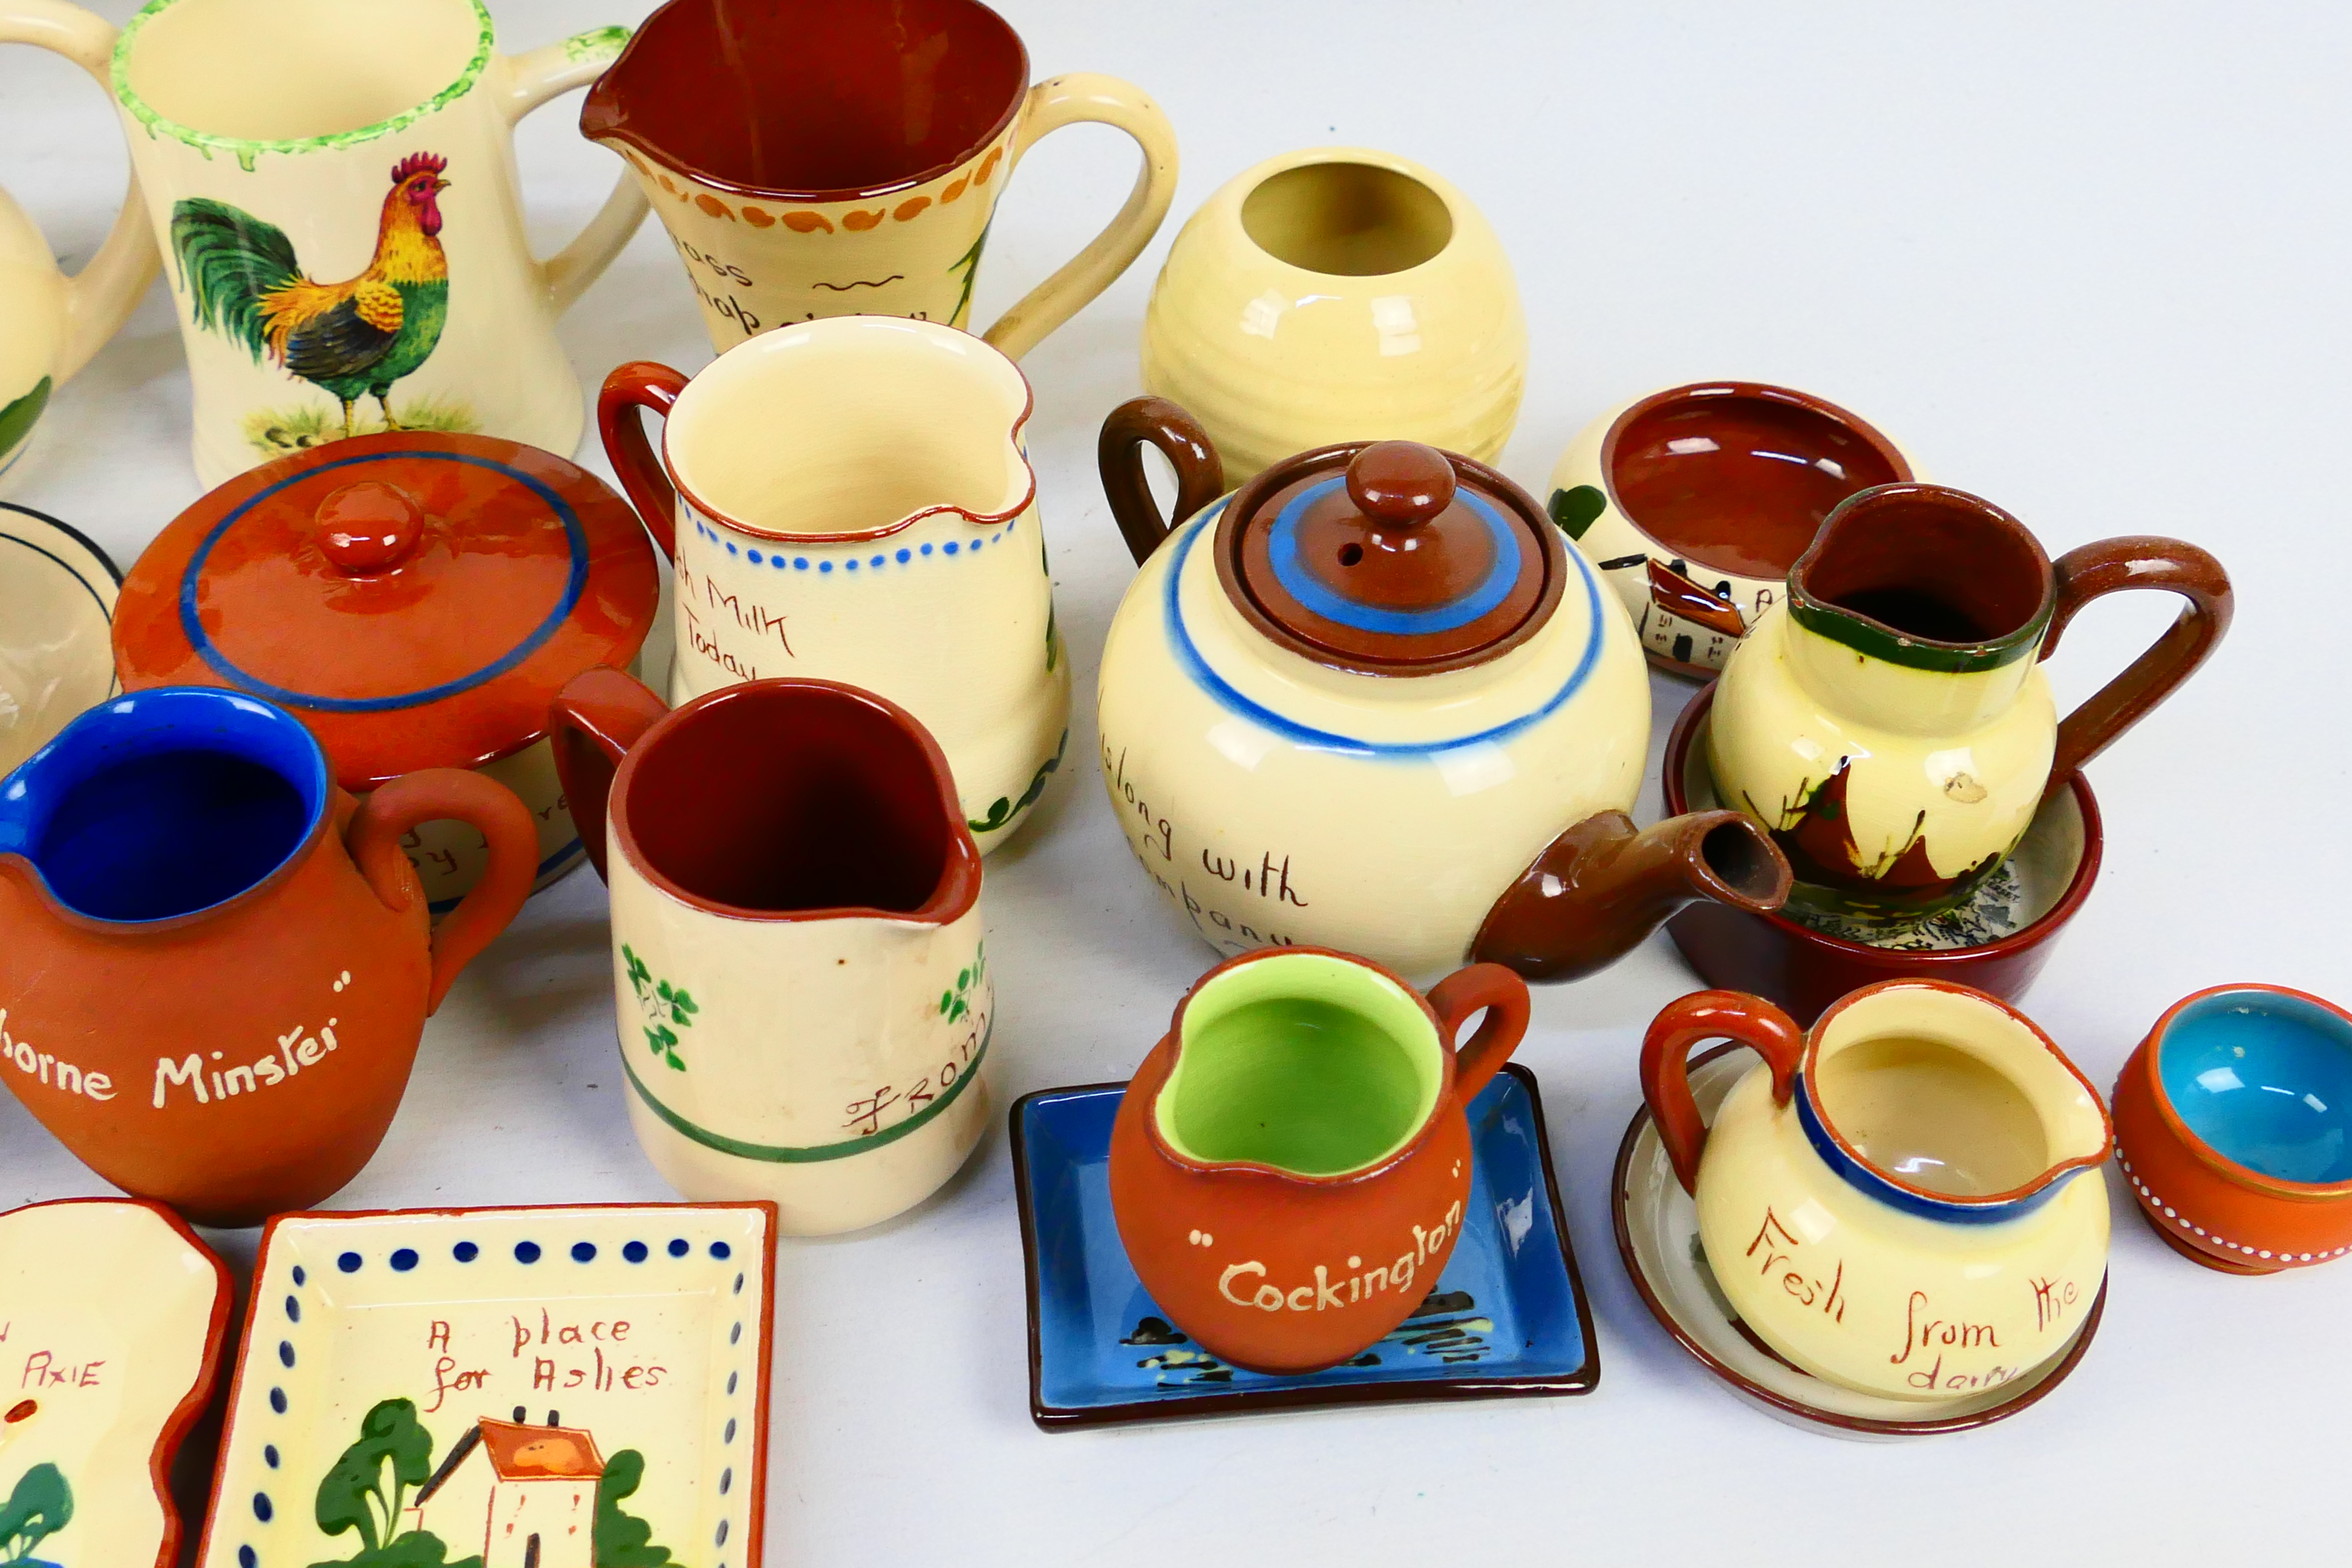 A collection of Torquay pottery wares to include bowls, jugs, vases, - Image 8 of 8